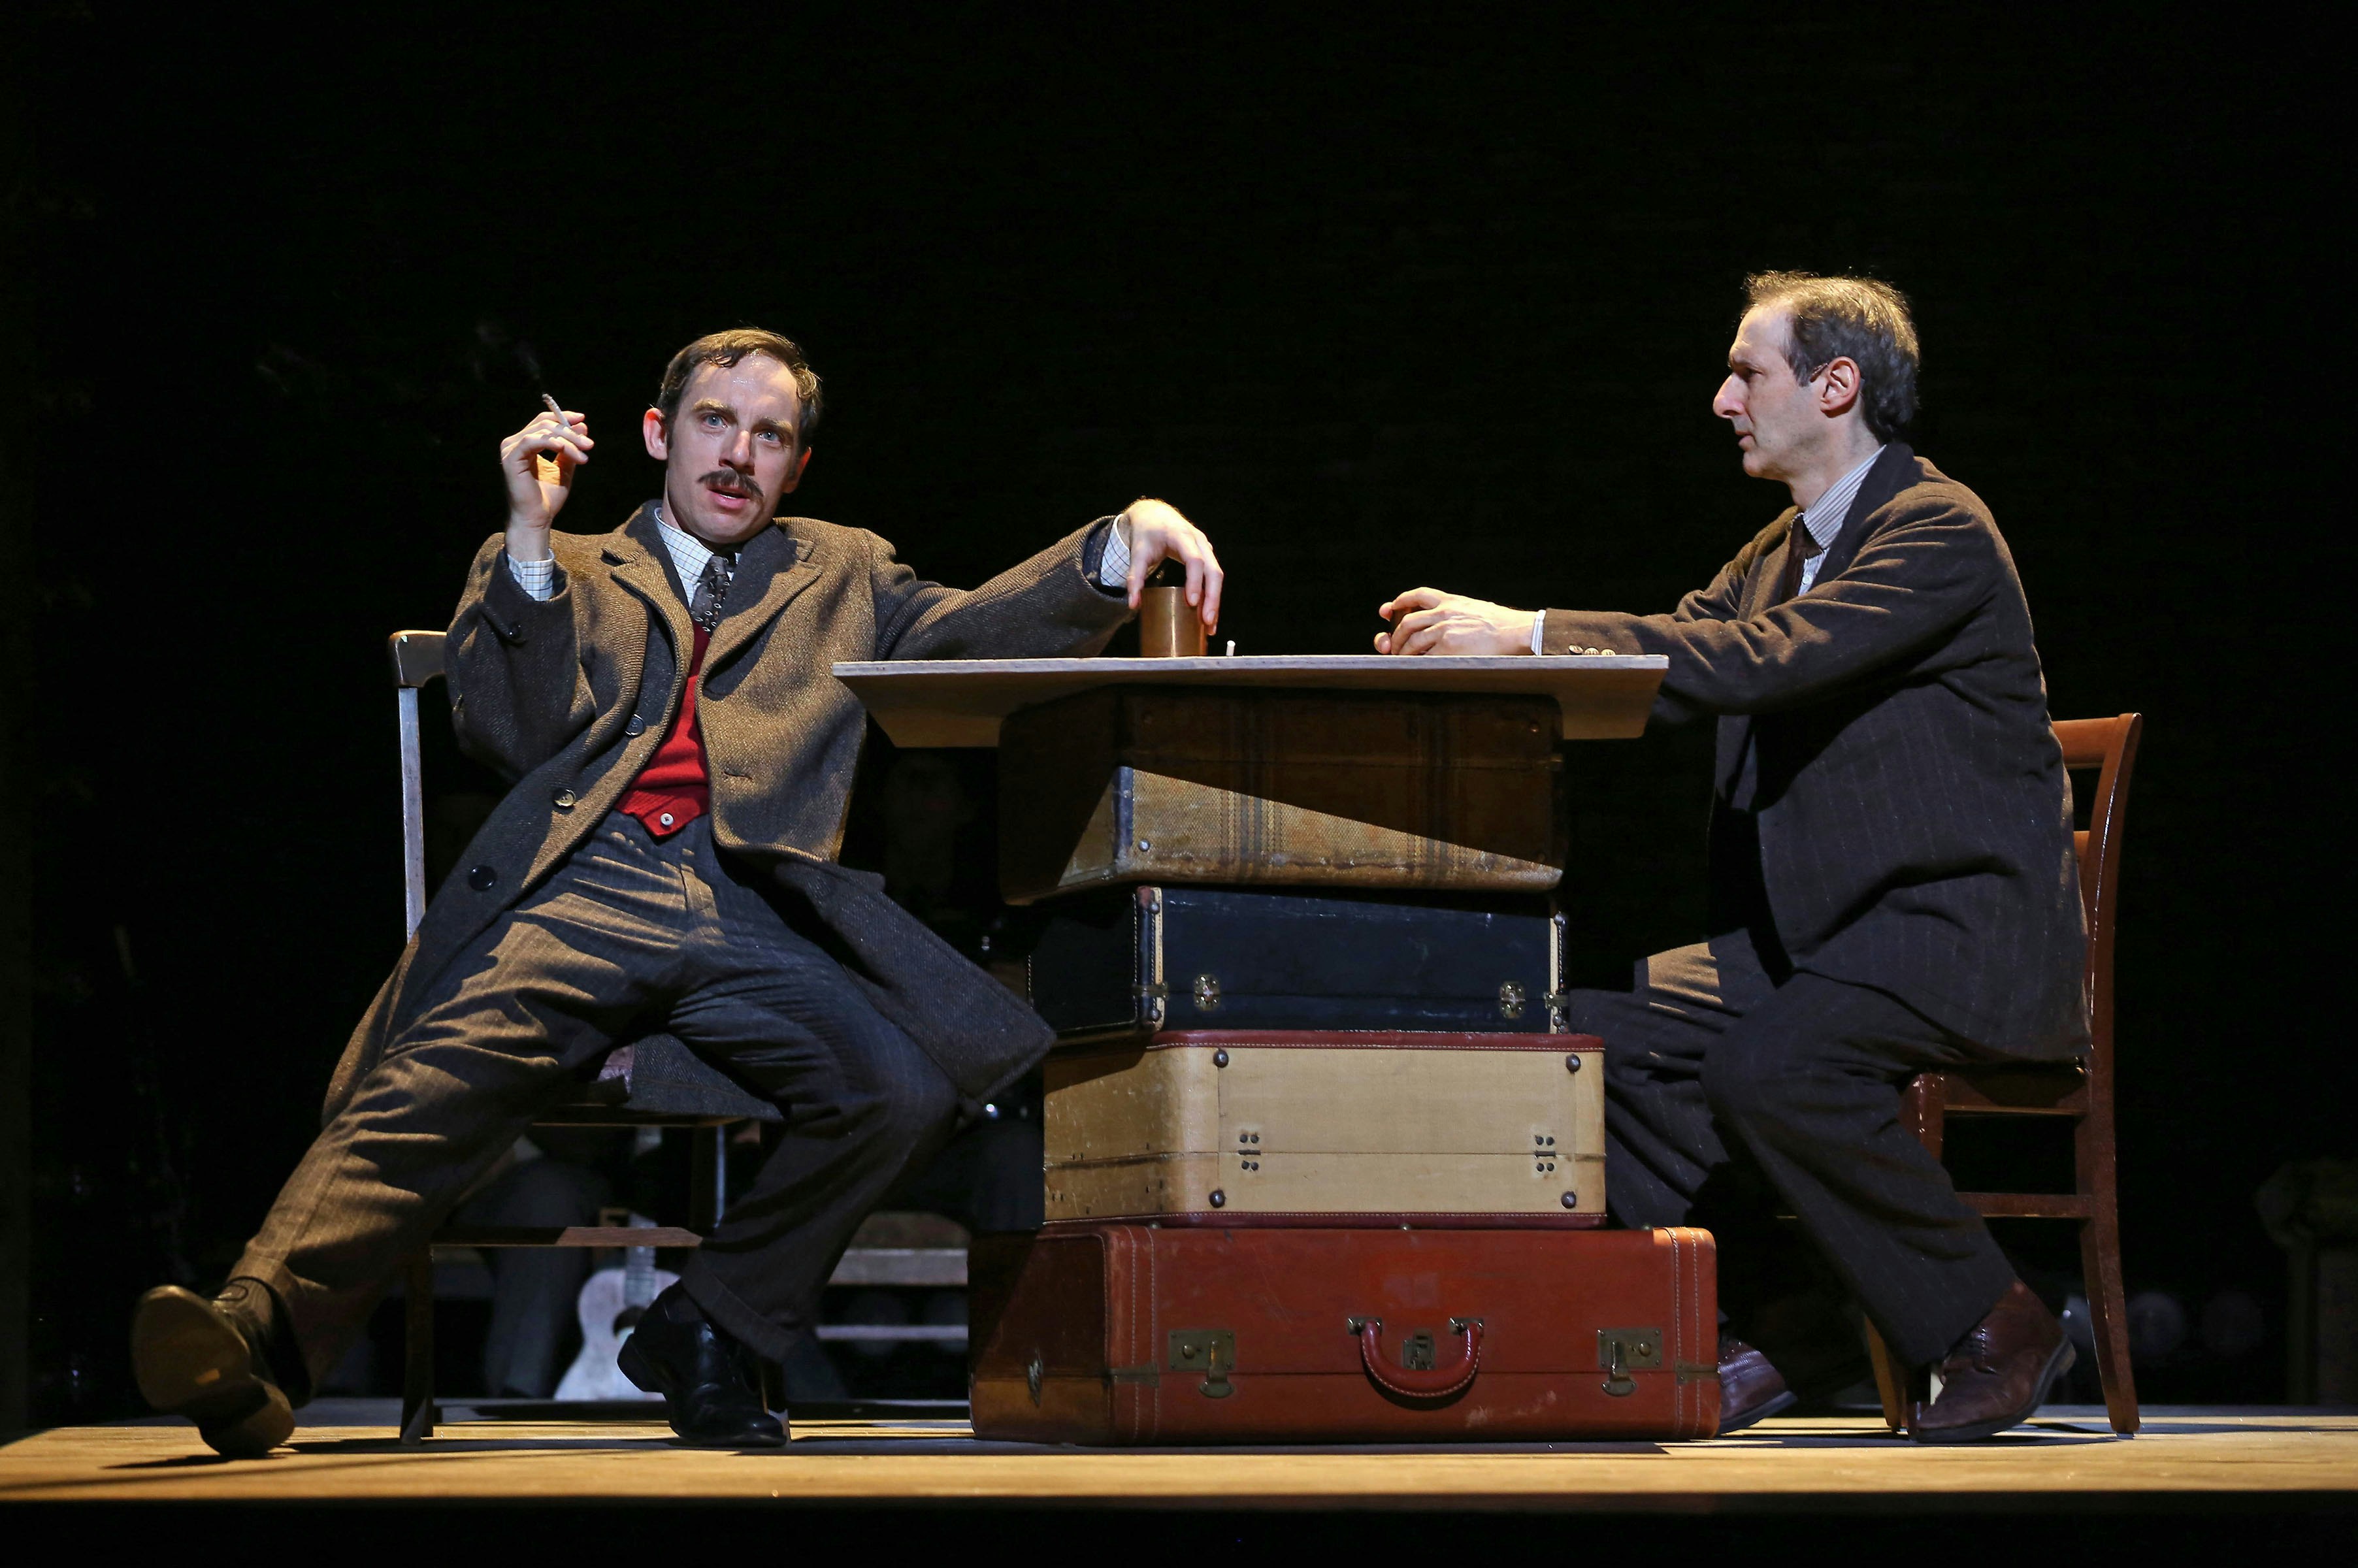 Two men sit at a table on a stage, one smoking.